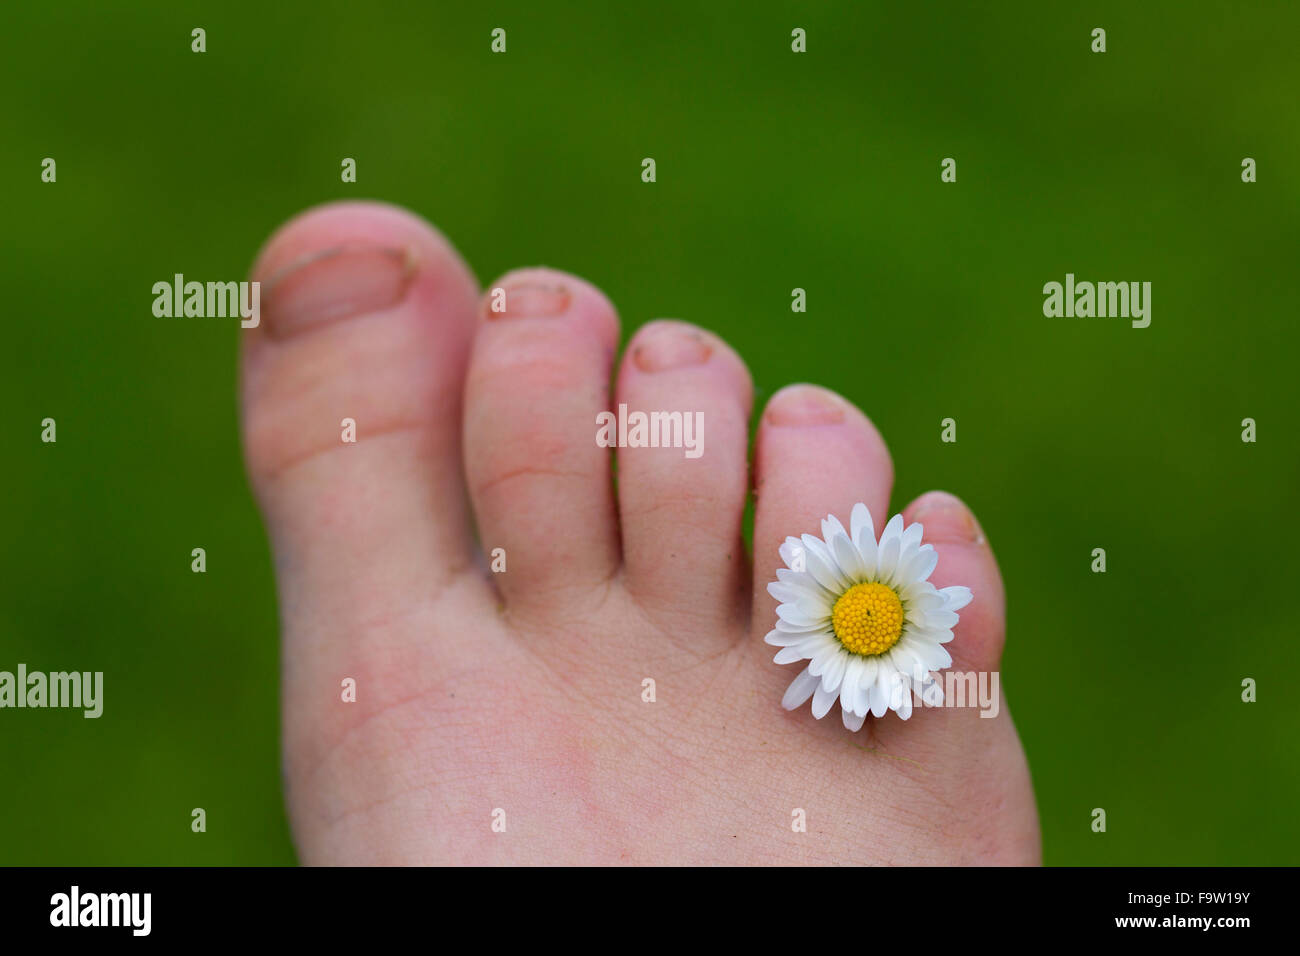 Common daisy / lawn daisy (Bellis perennis) flower between toes of child's foot Stock Photo